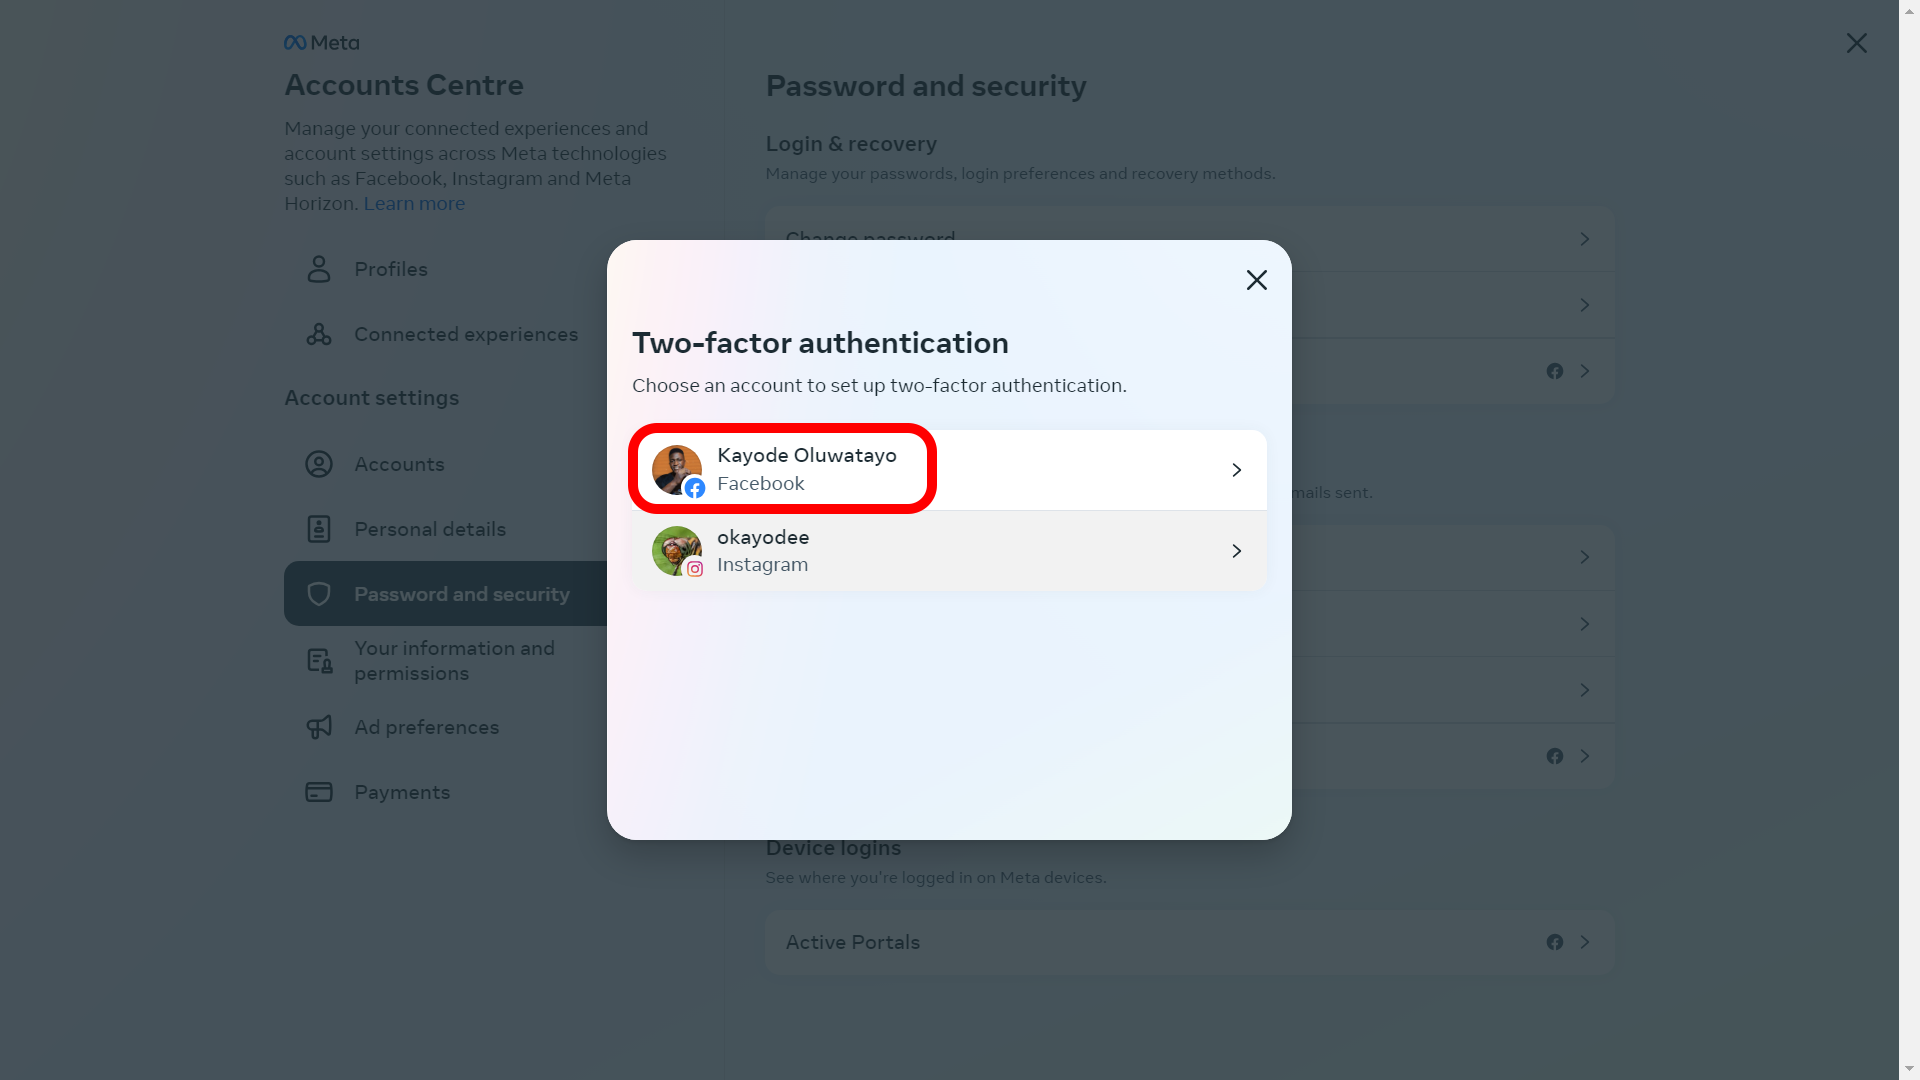 The Two-factor authentication dialog box highlighting a user account